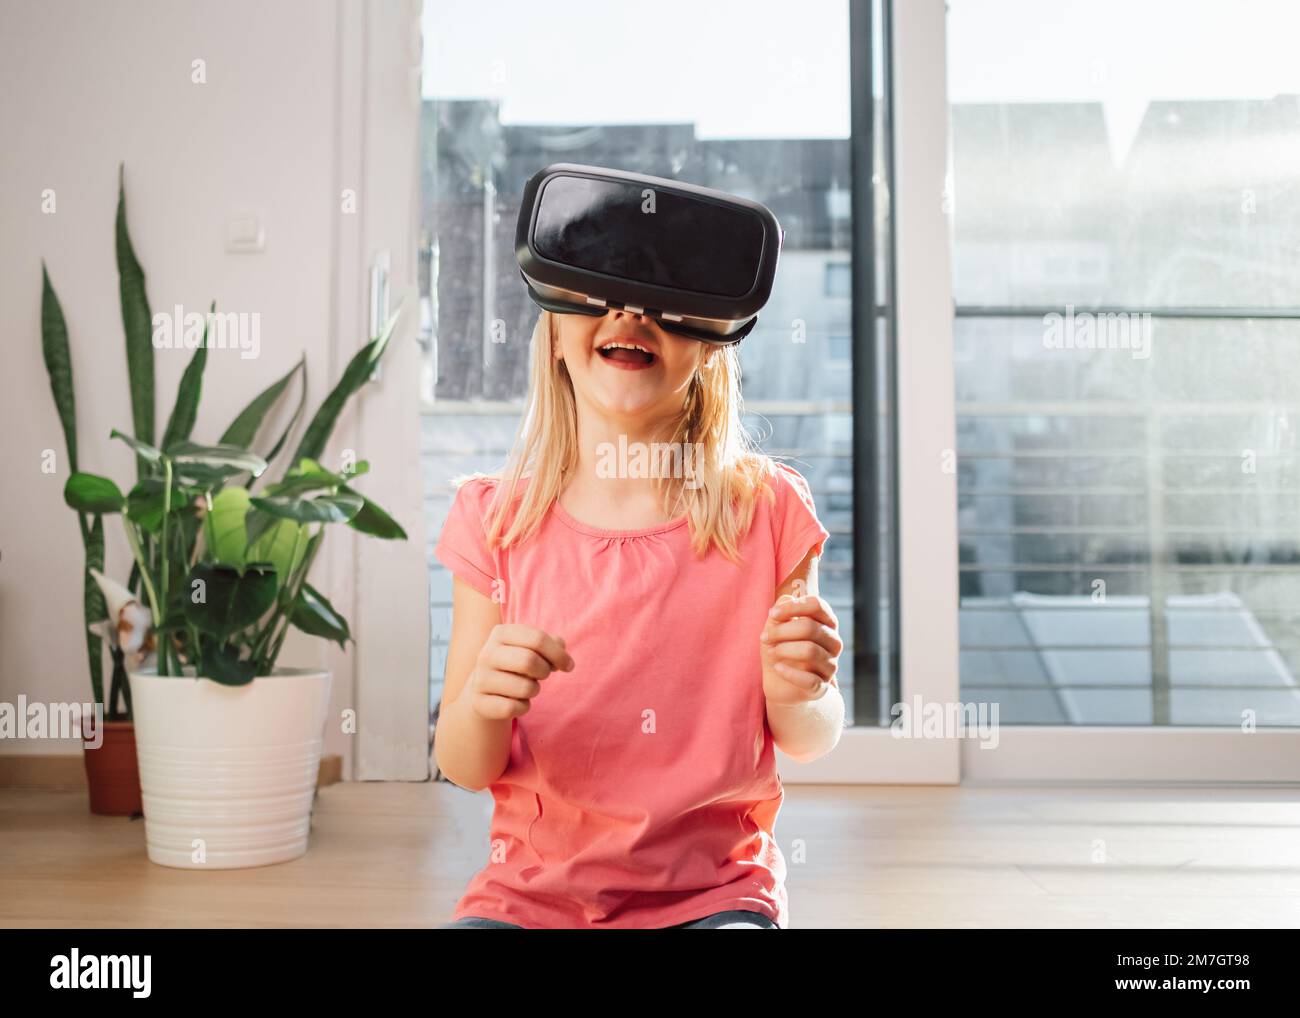 Cheerful blonde female child smiling and enjoying in virtual reality world using VR glasses. Children, technology and development concept. Stock Photo